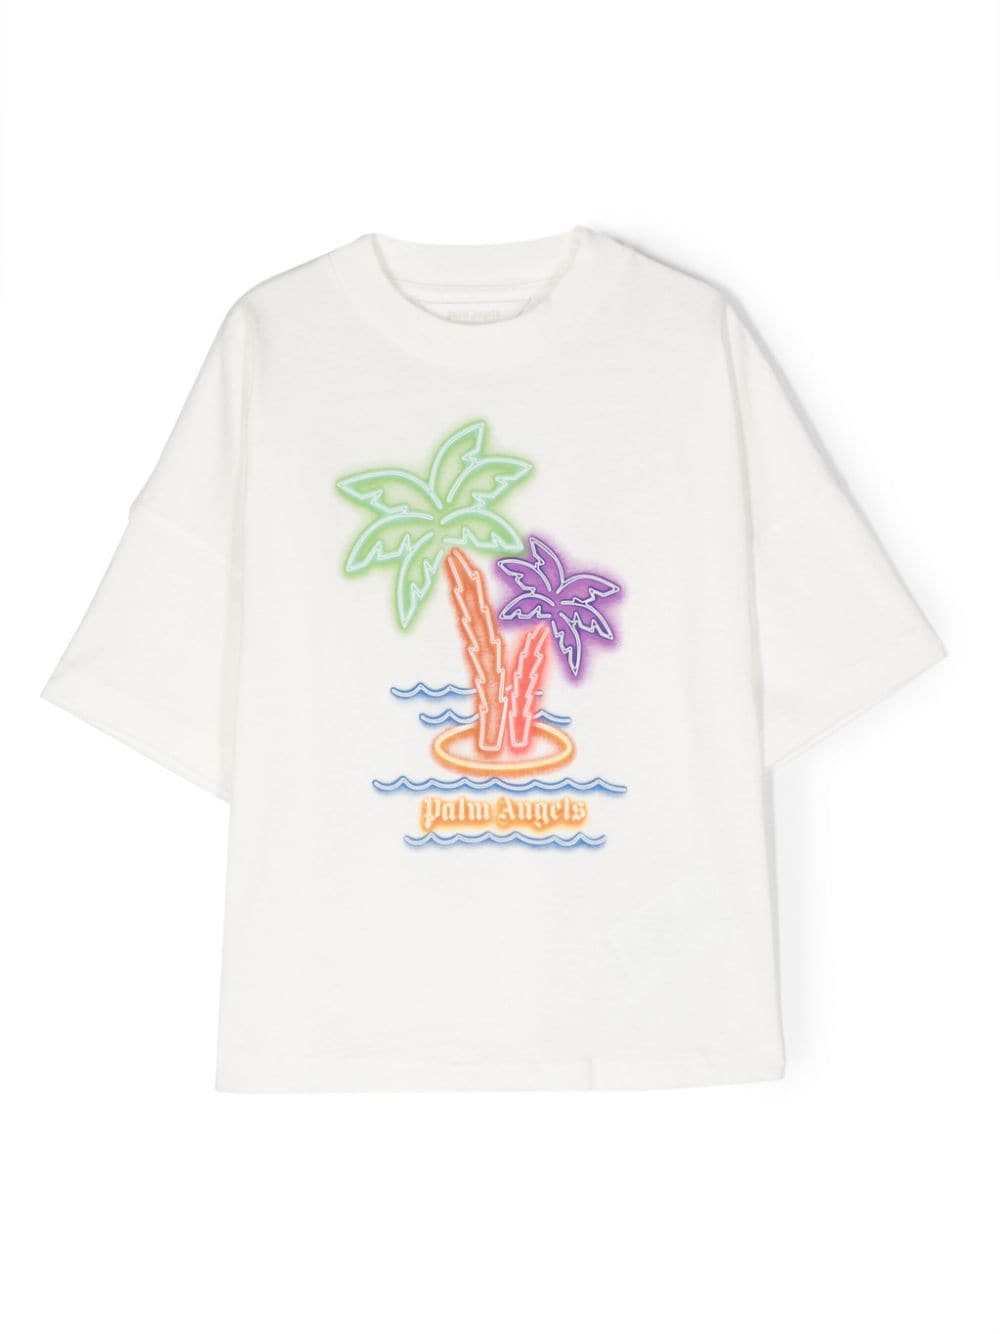 White t-shirt for boys with palm tree print